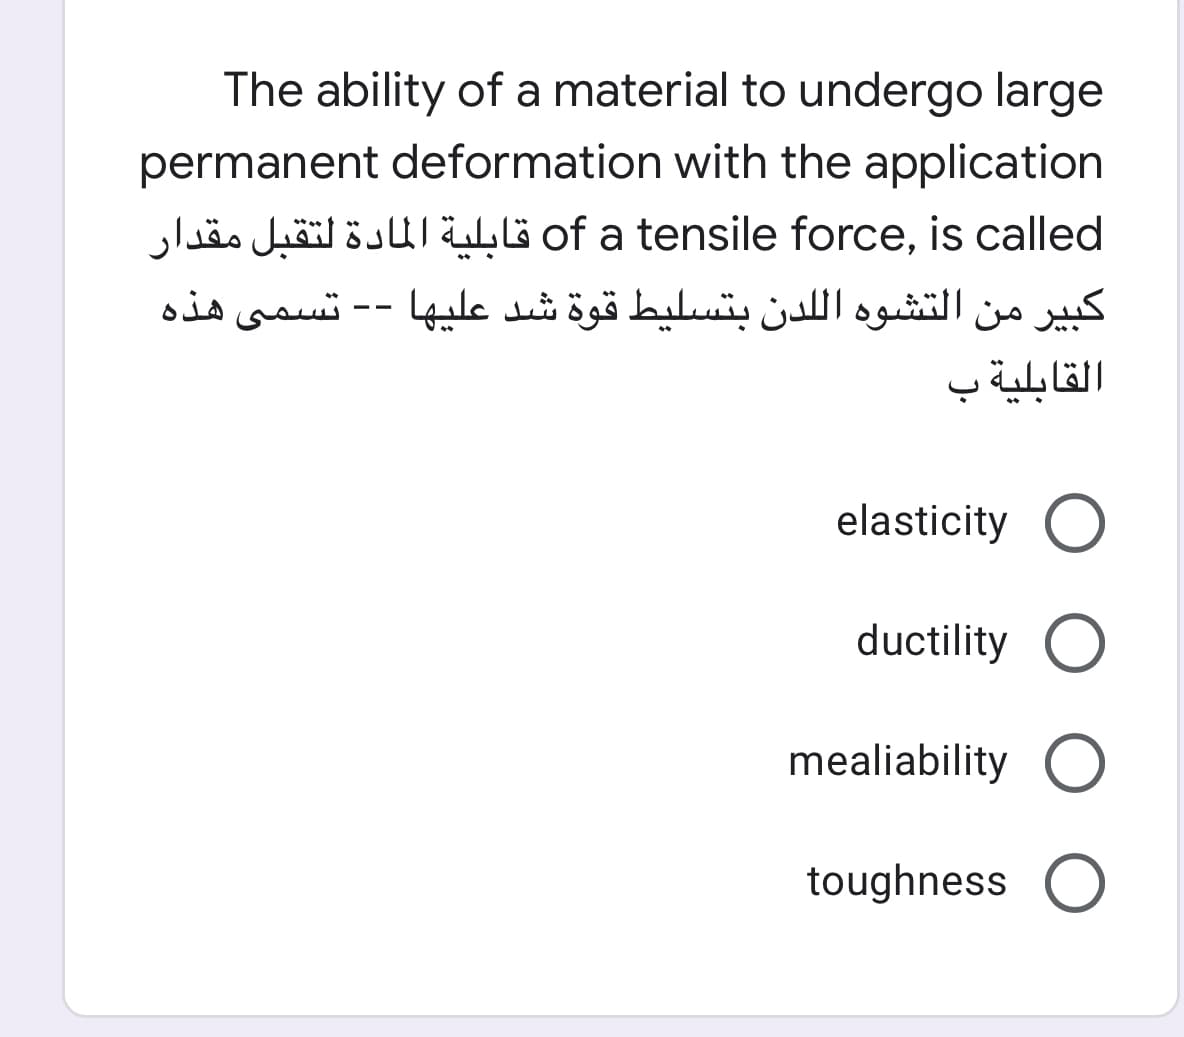 The ability of a material to undergo large
permanent deformation with the application
of a tensile force, is called قابلية المادة لتقبل مقدار
تسمي هذه
كبير من التشوه ال لدن بتسليط قوة شد عليها
--
القابلية ب
elasticity
ductility
mealiability
toughness
